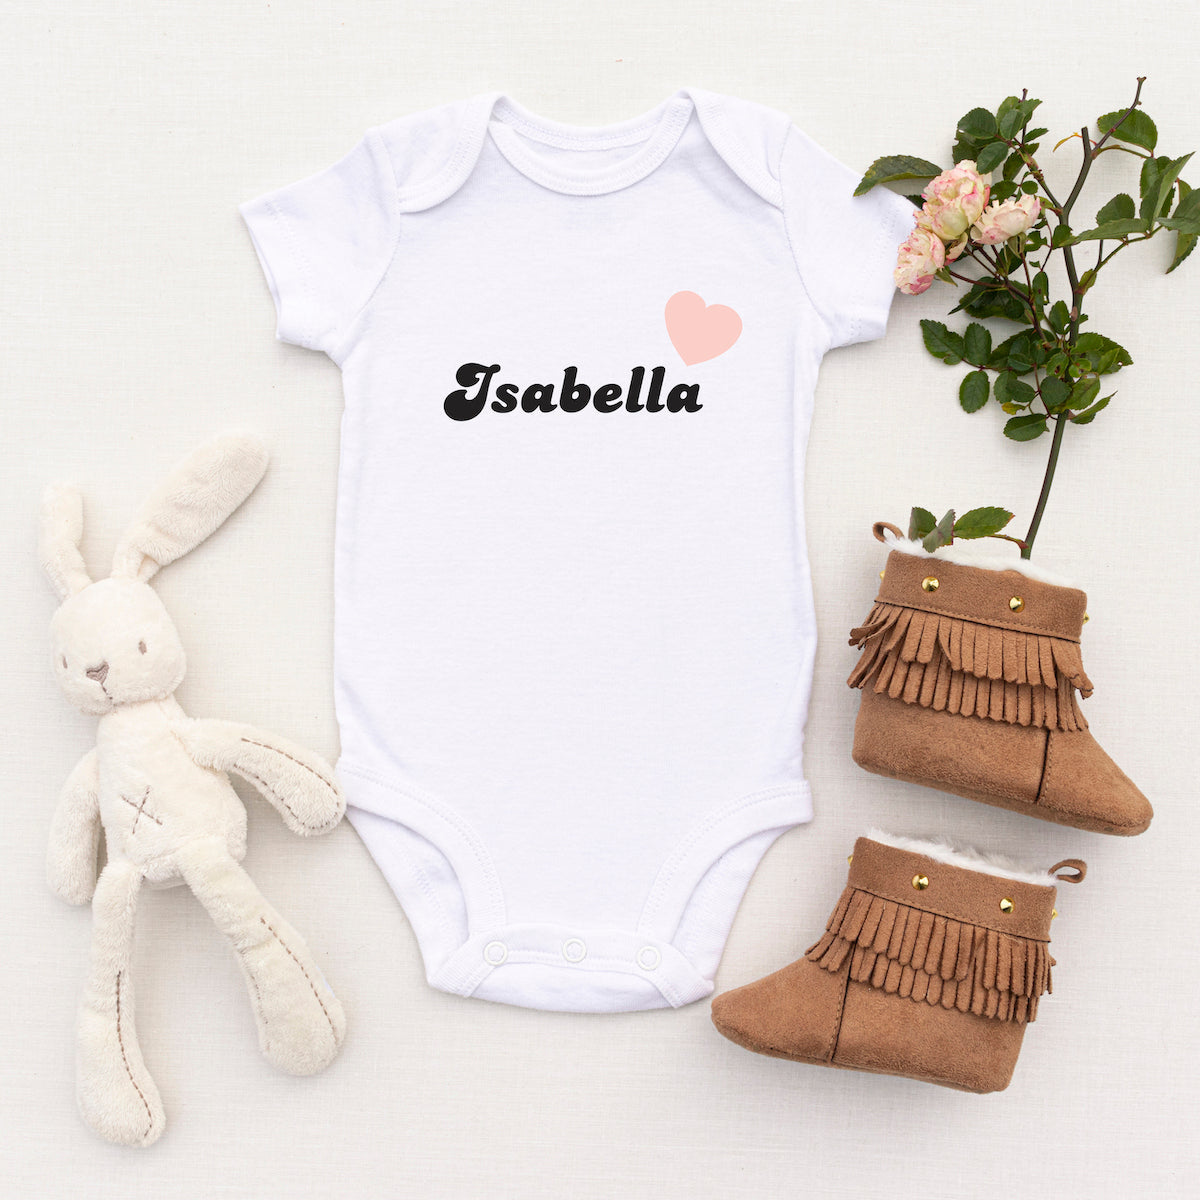 Personalised White Baby Body Suit Grow Vest - Any Text